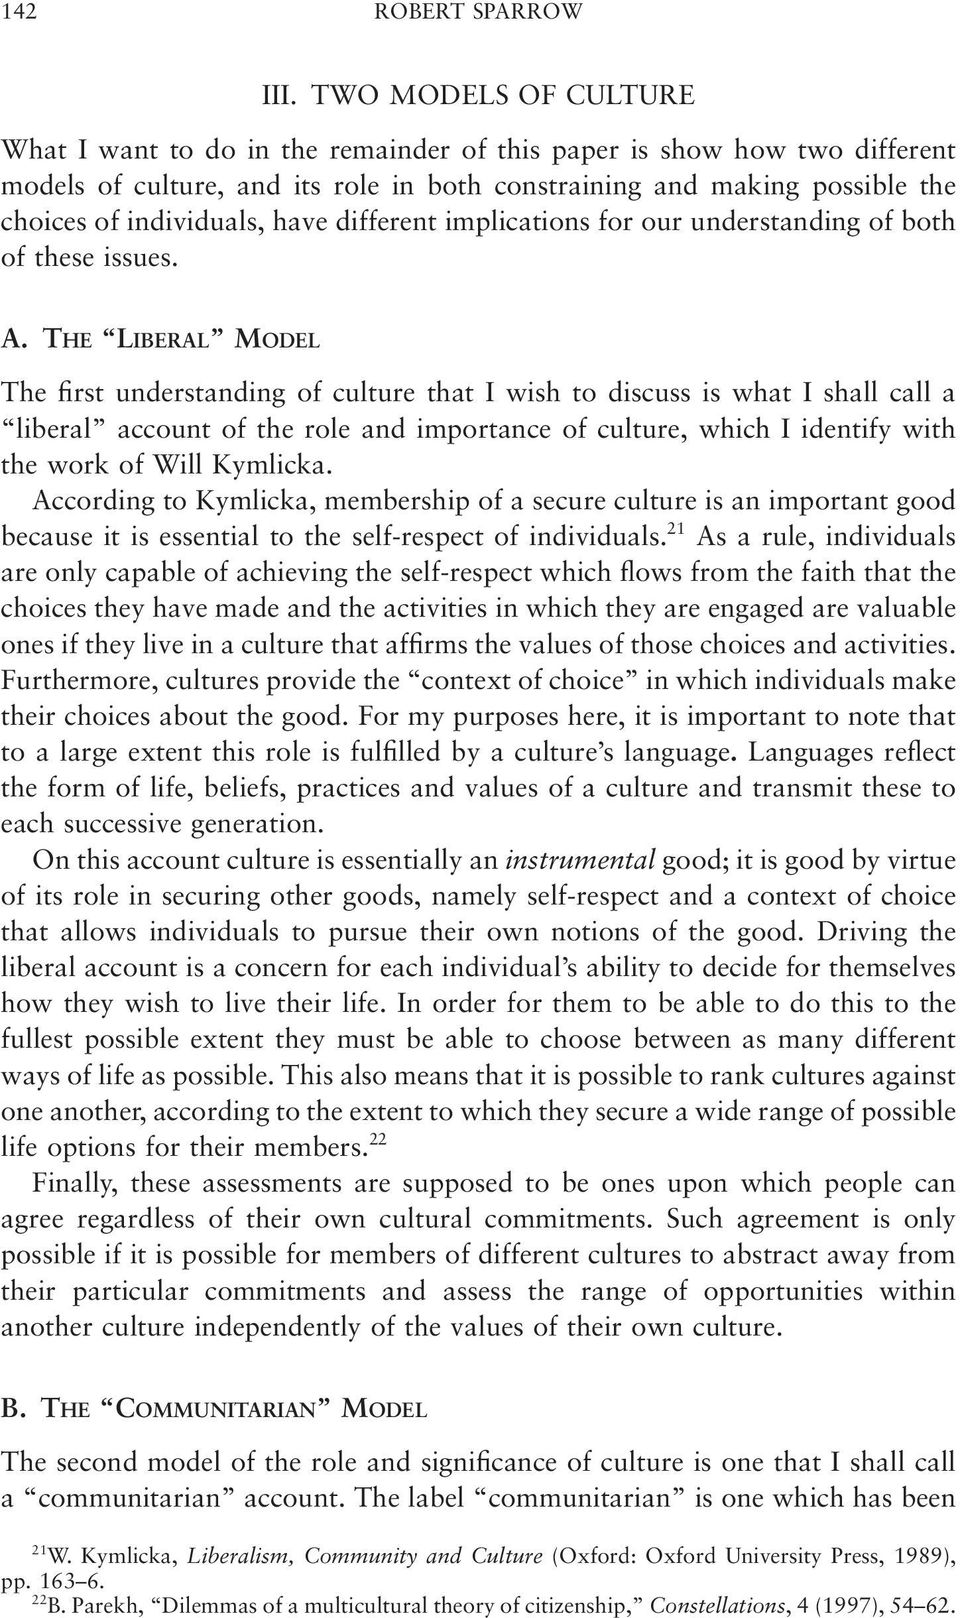 Essay on the Aristotle’s Concept of Citizen and Its Criticisms